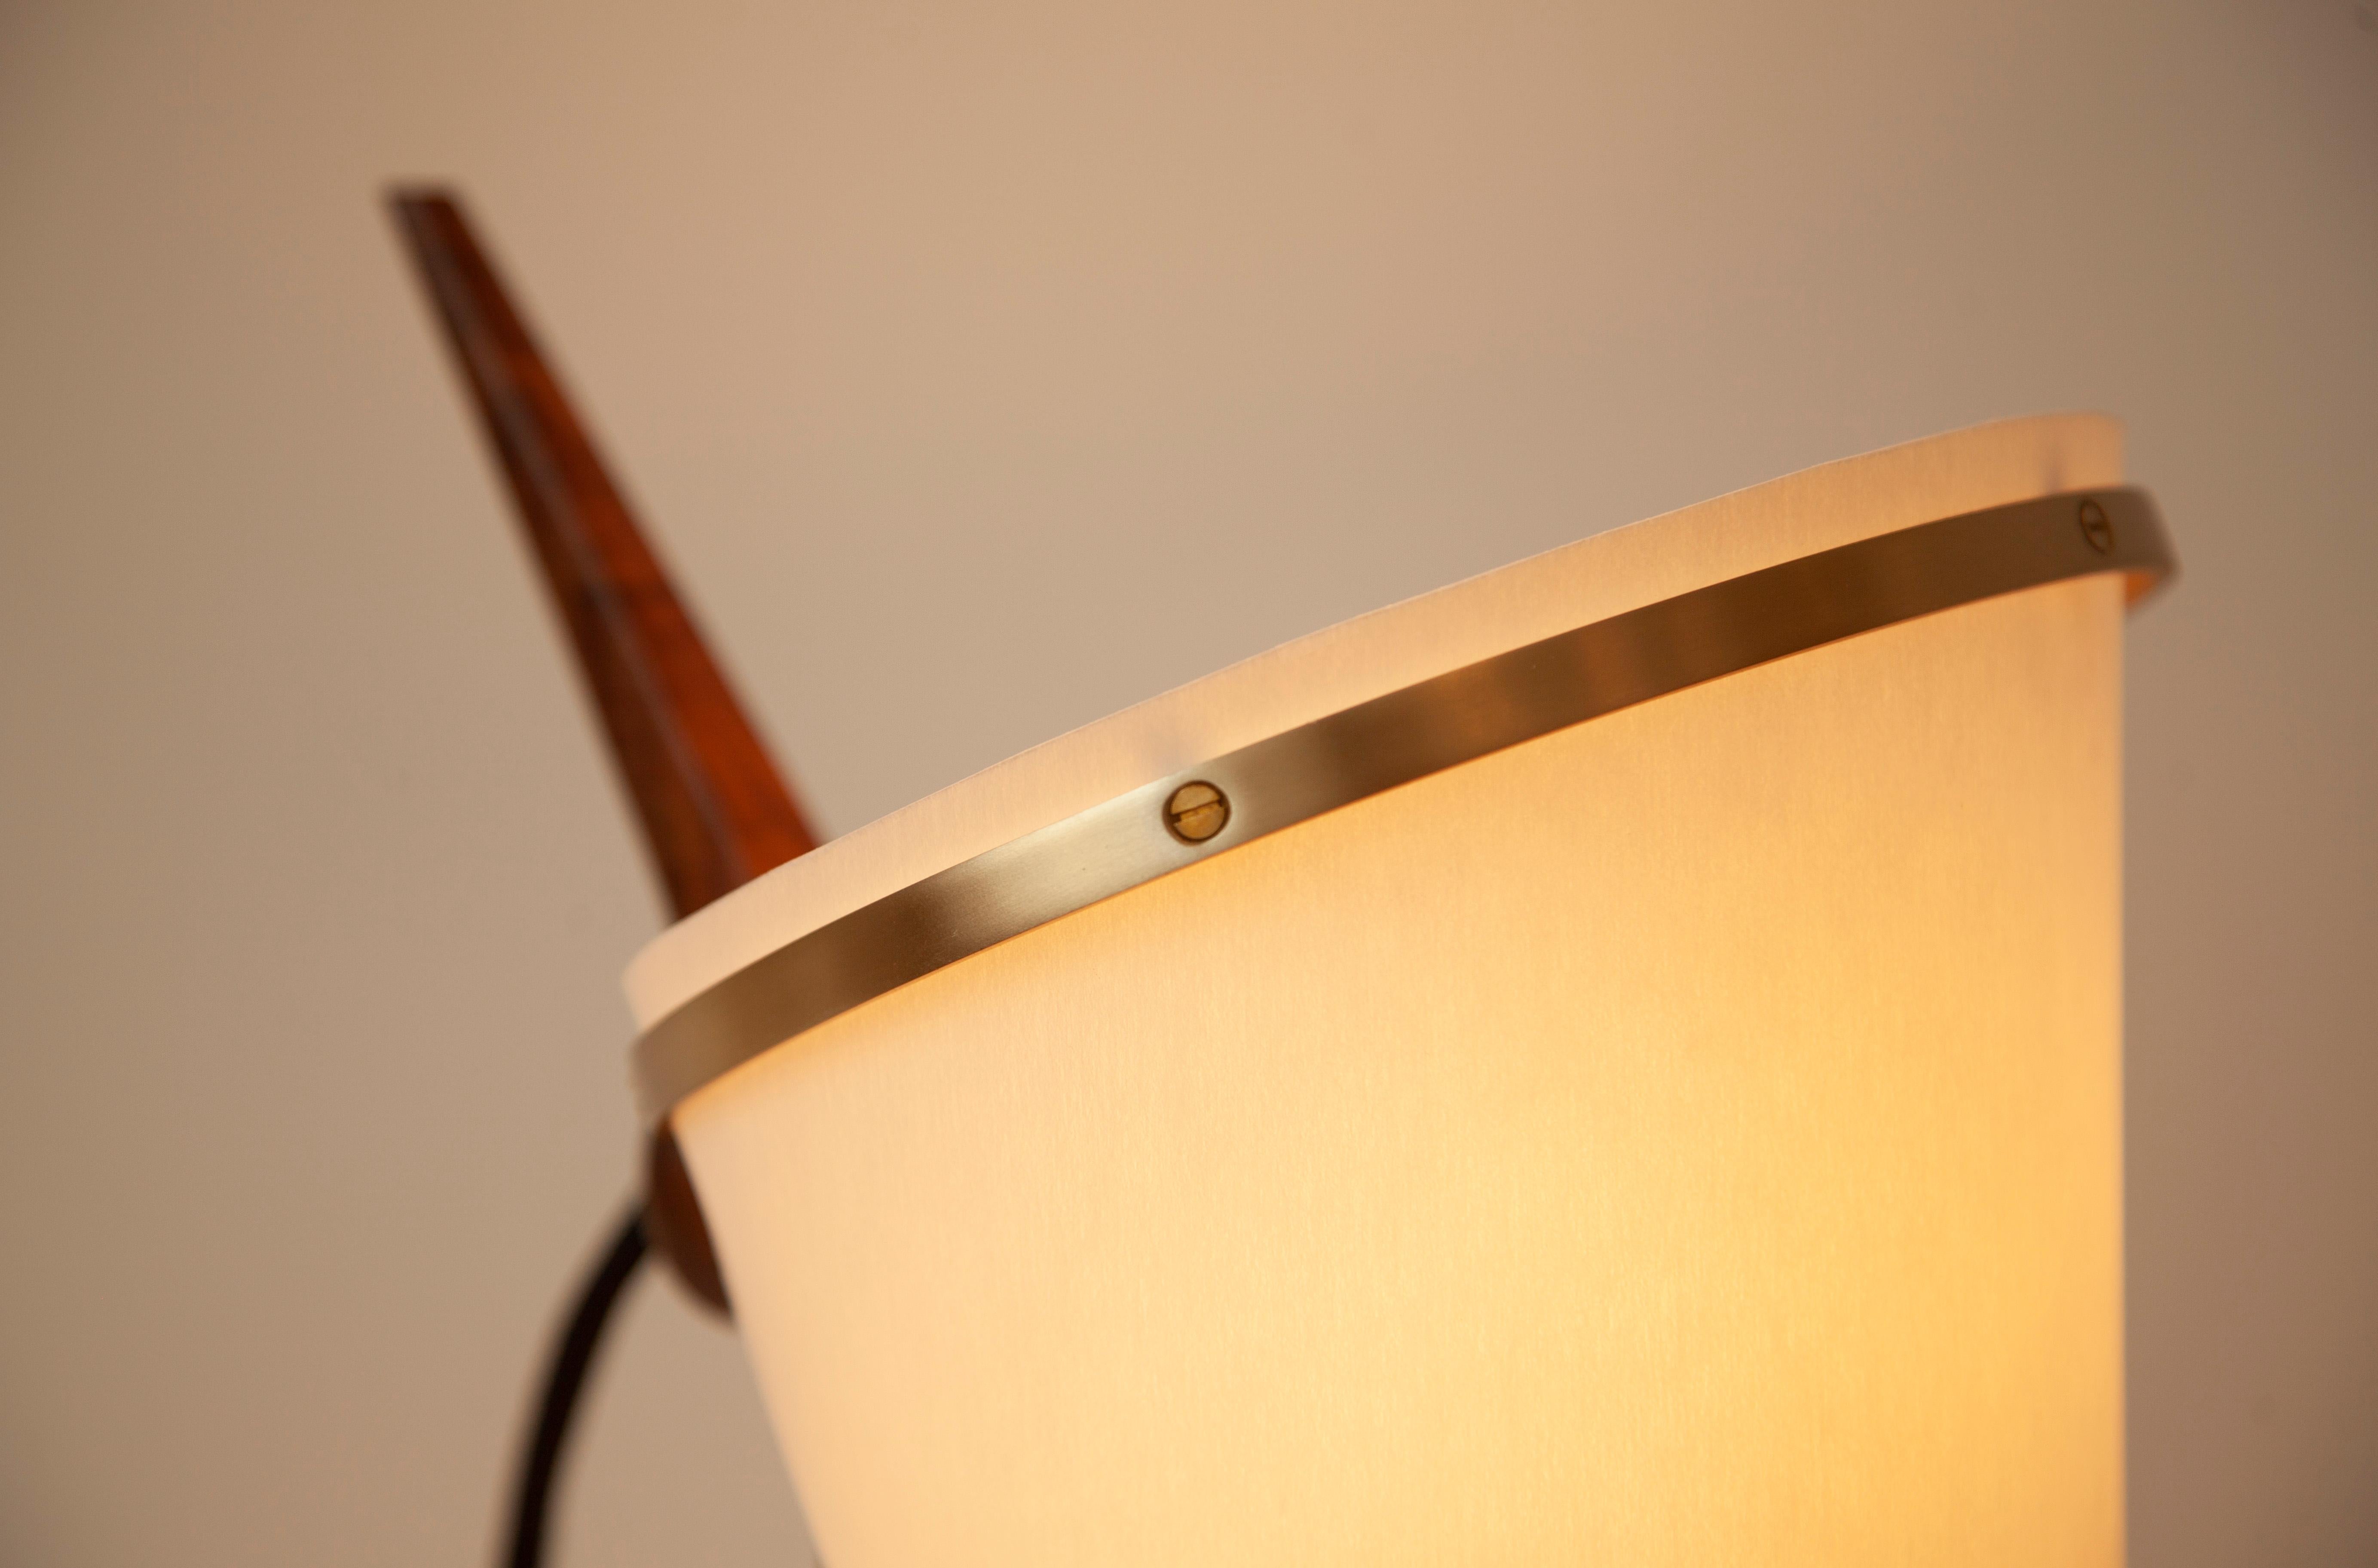 The Armitage Accent Lamp differs slightly from the rest of the Armitage Lamp Collection given it's solid brass structure, though shares the same characteristics with its black walnut tail detail and of course it's shade sourced from recycled water